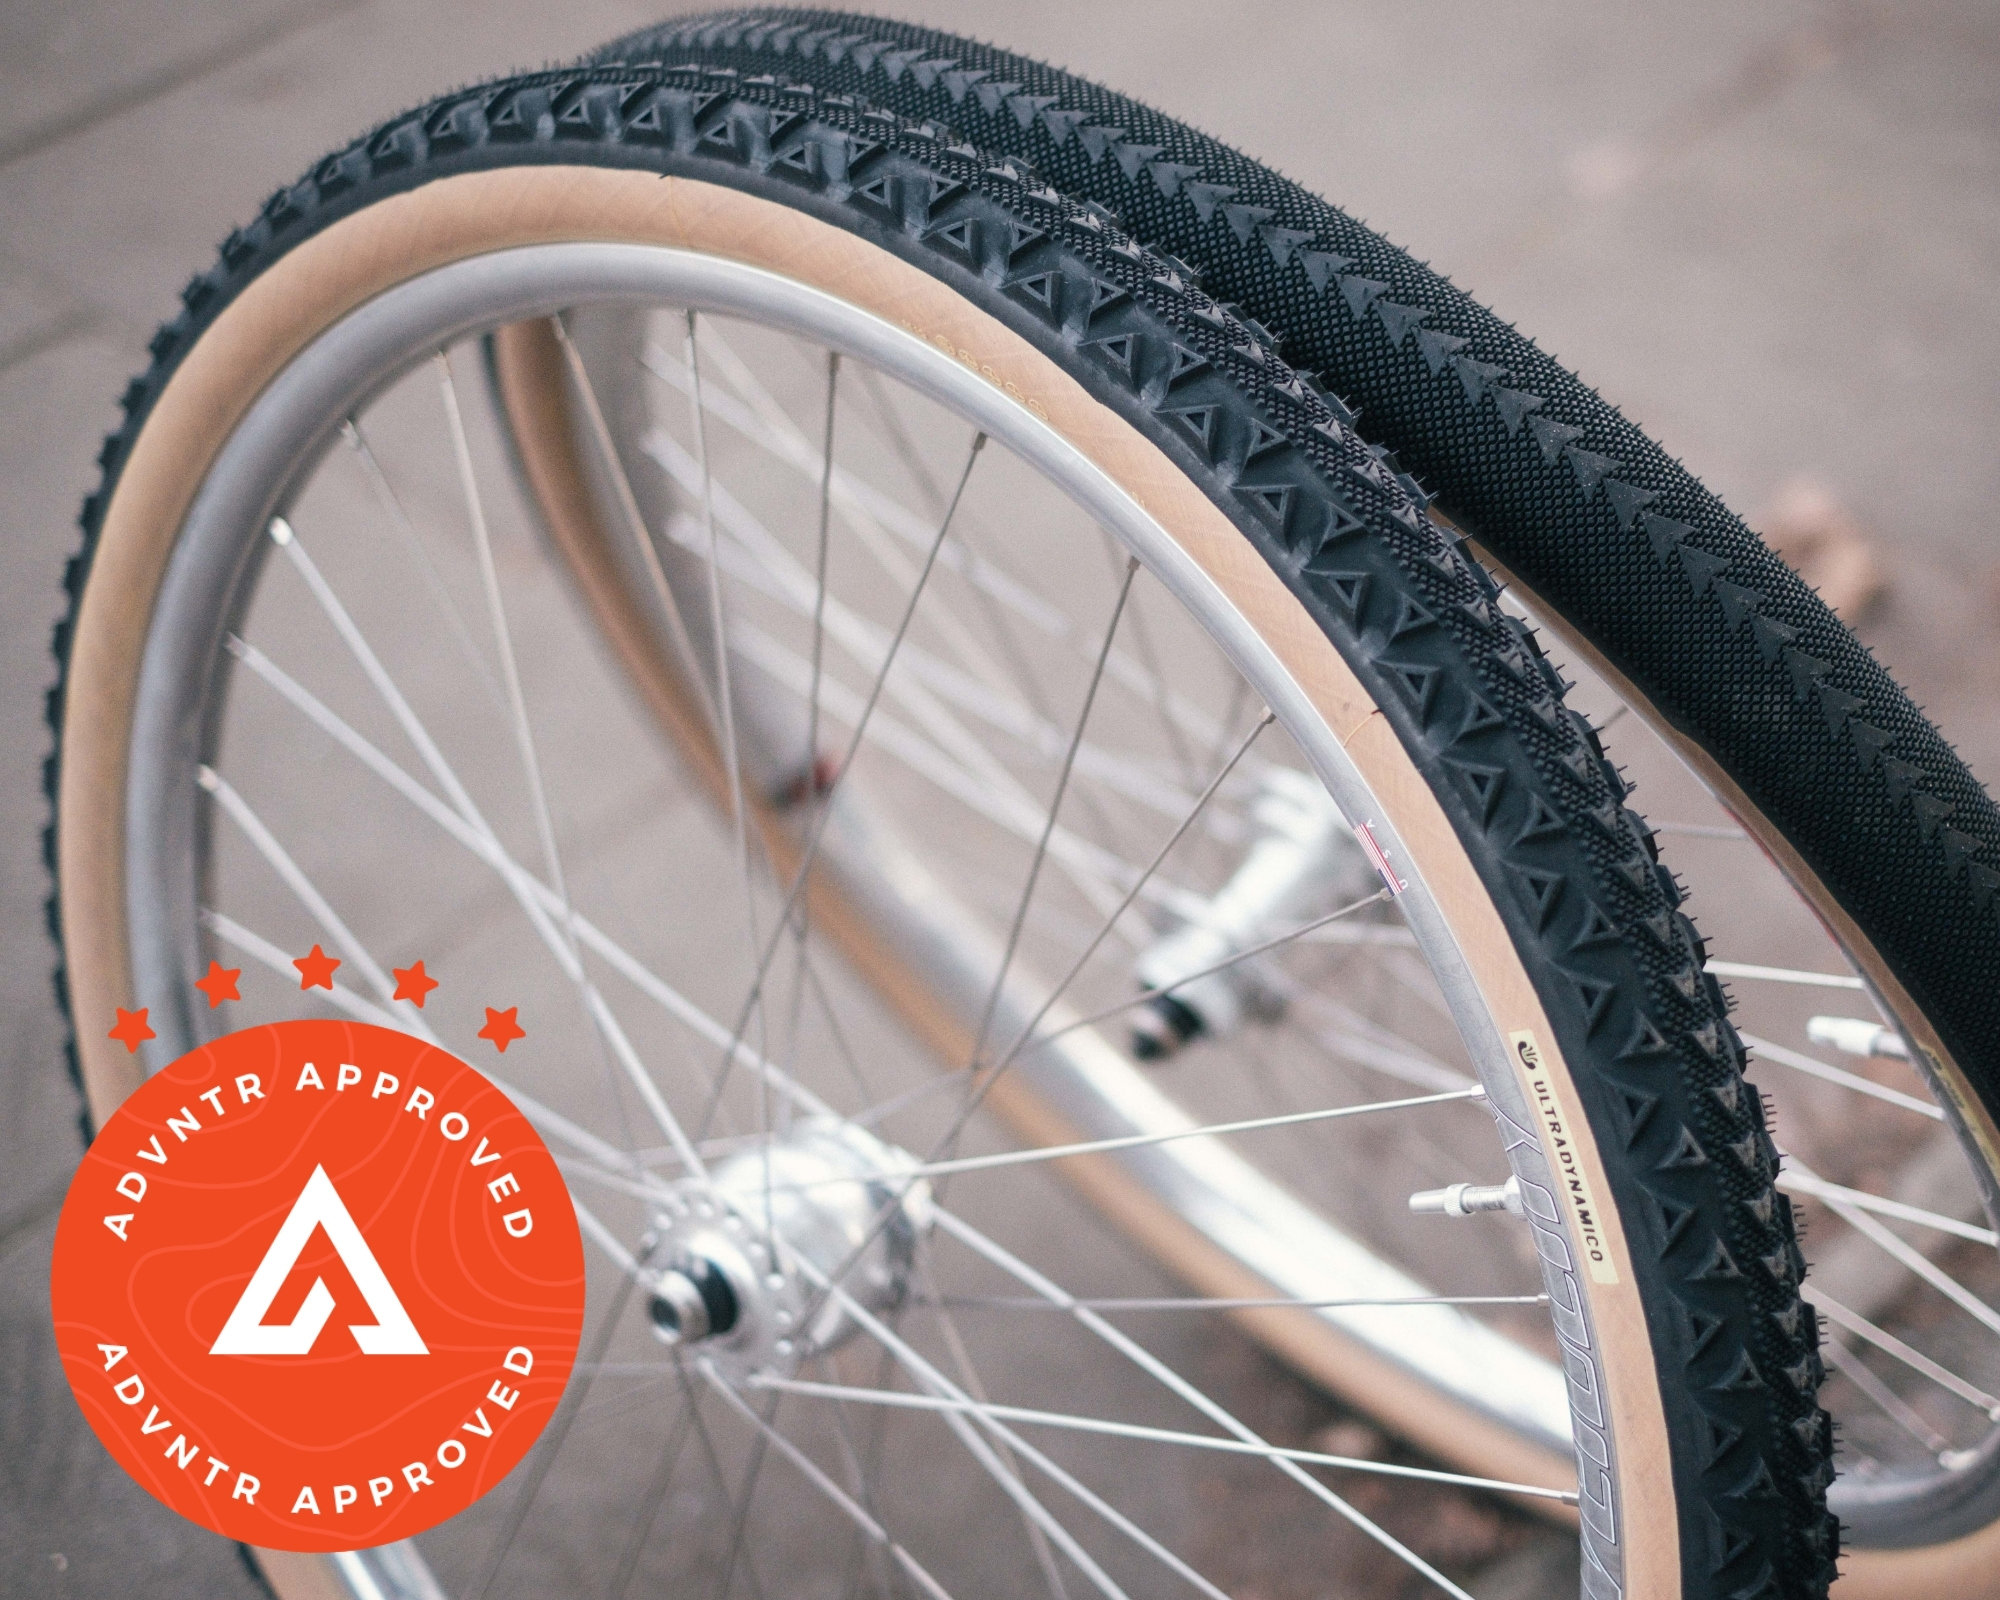 ADVNTR Approved Gear of the year